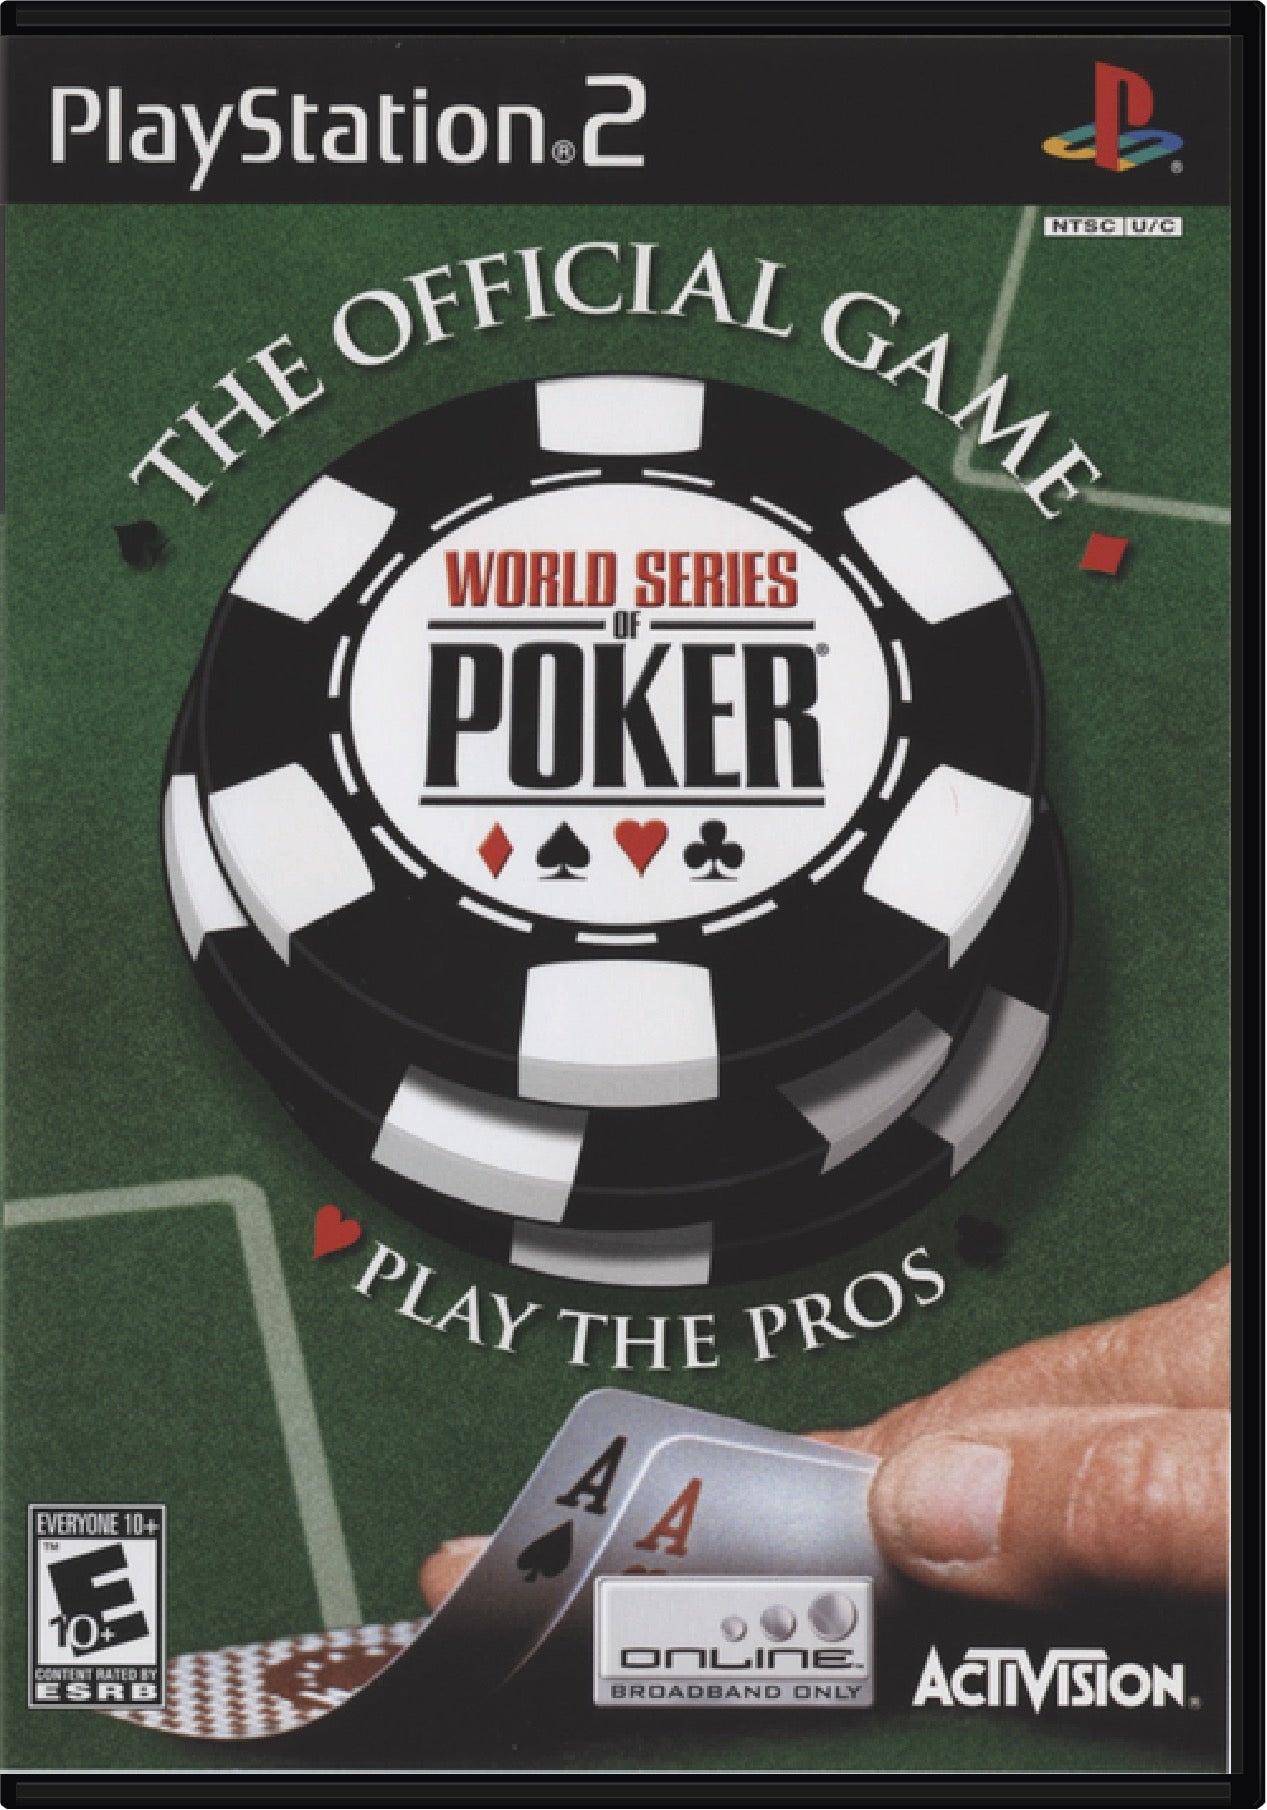 World Series of Poker Cover Art and Product Photo